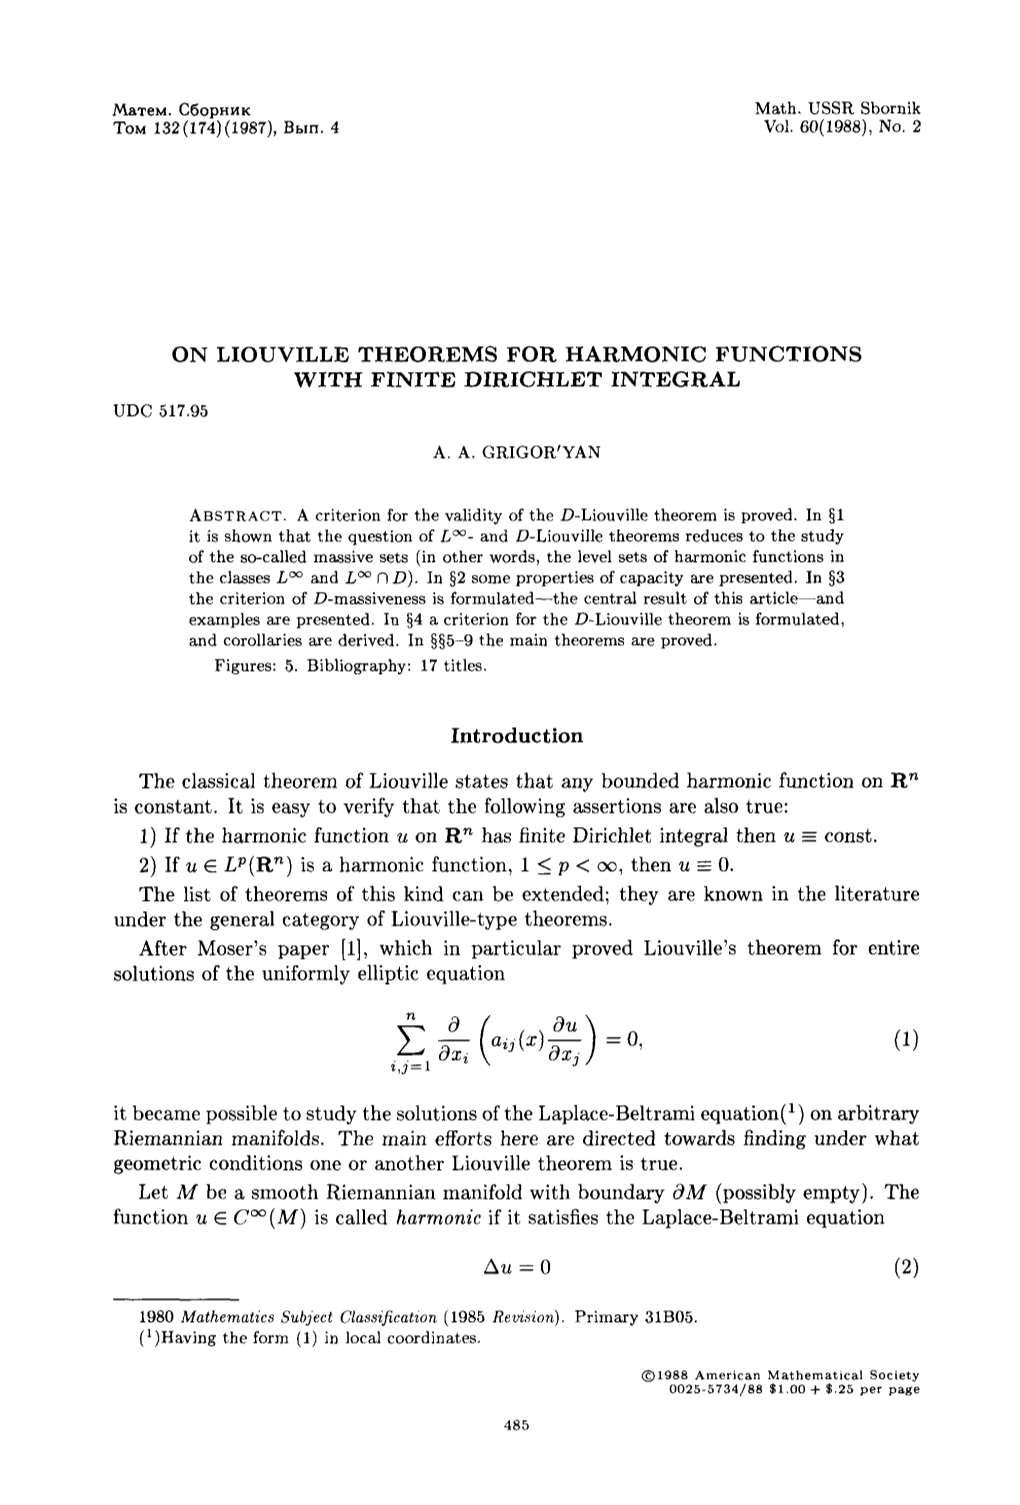 On Liouville Theorems for Harmonic Functions with Finite Dirichlet Integral Udc 517.95